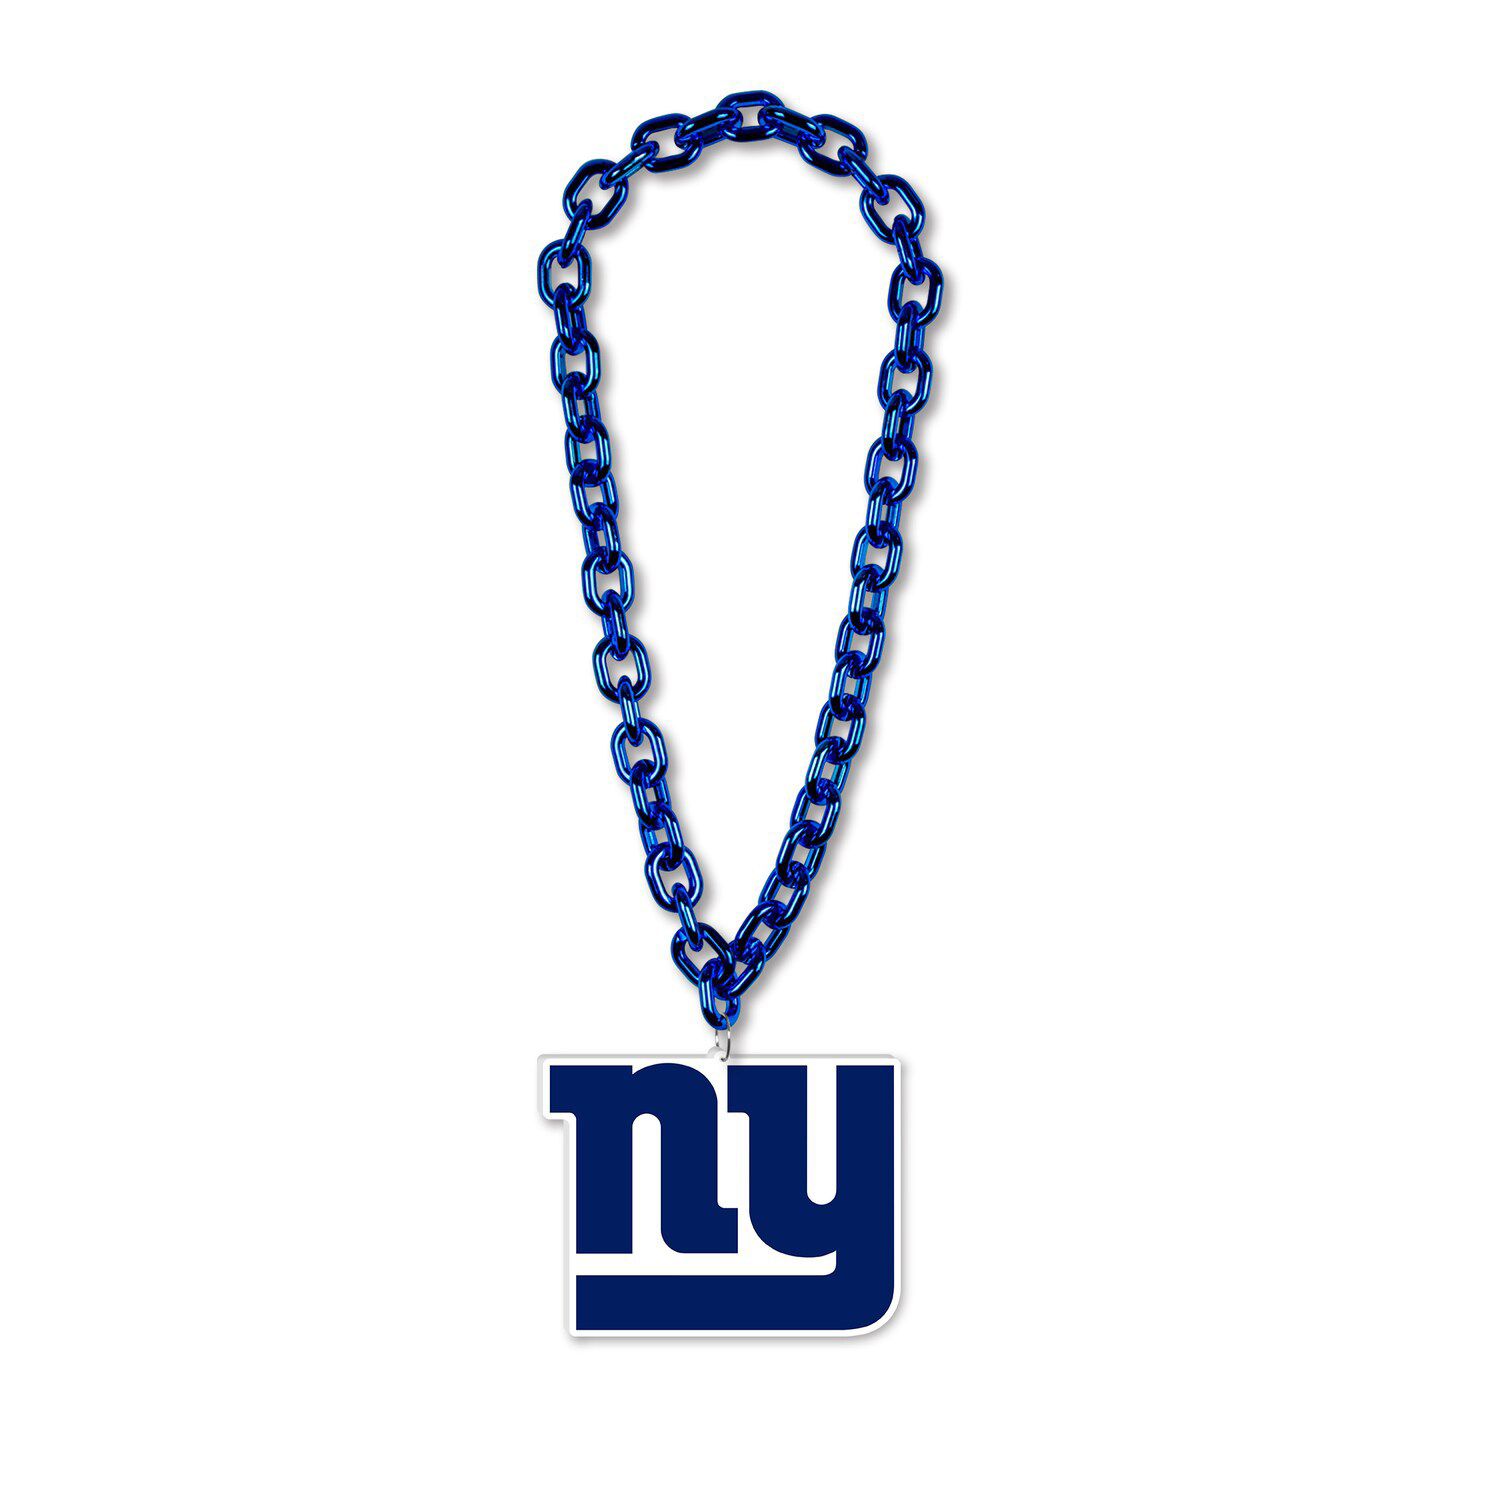 Wear by Erin Andrews x Baublebar New York Giants Gold Dog Tag Necklace